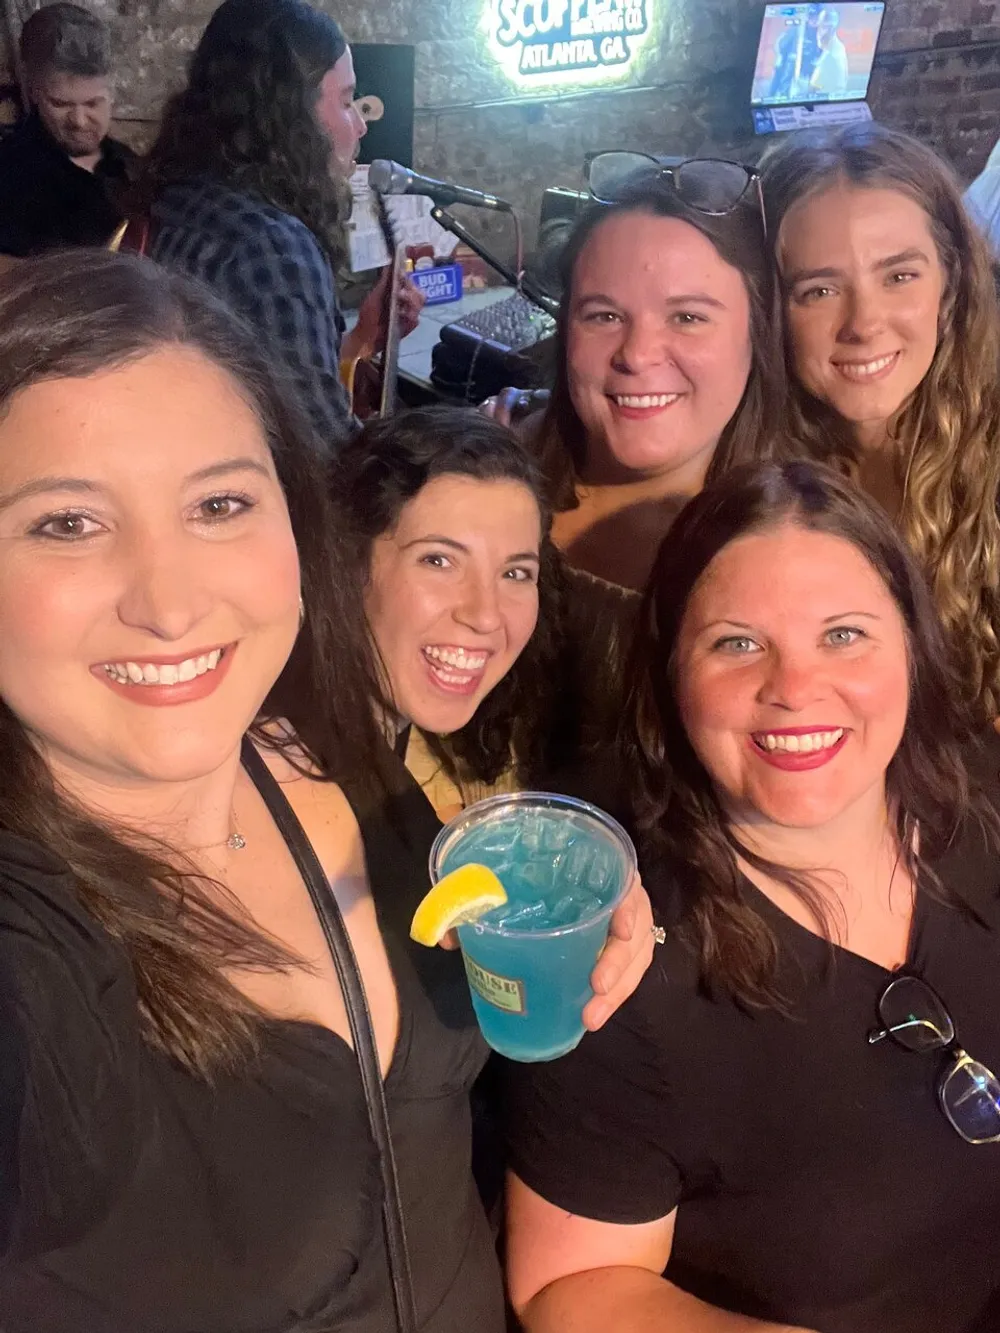 A group of smiling women is posing for a selfie at a lively bar with a musician performing in the background